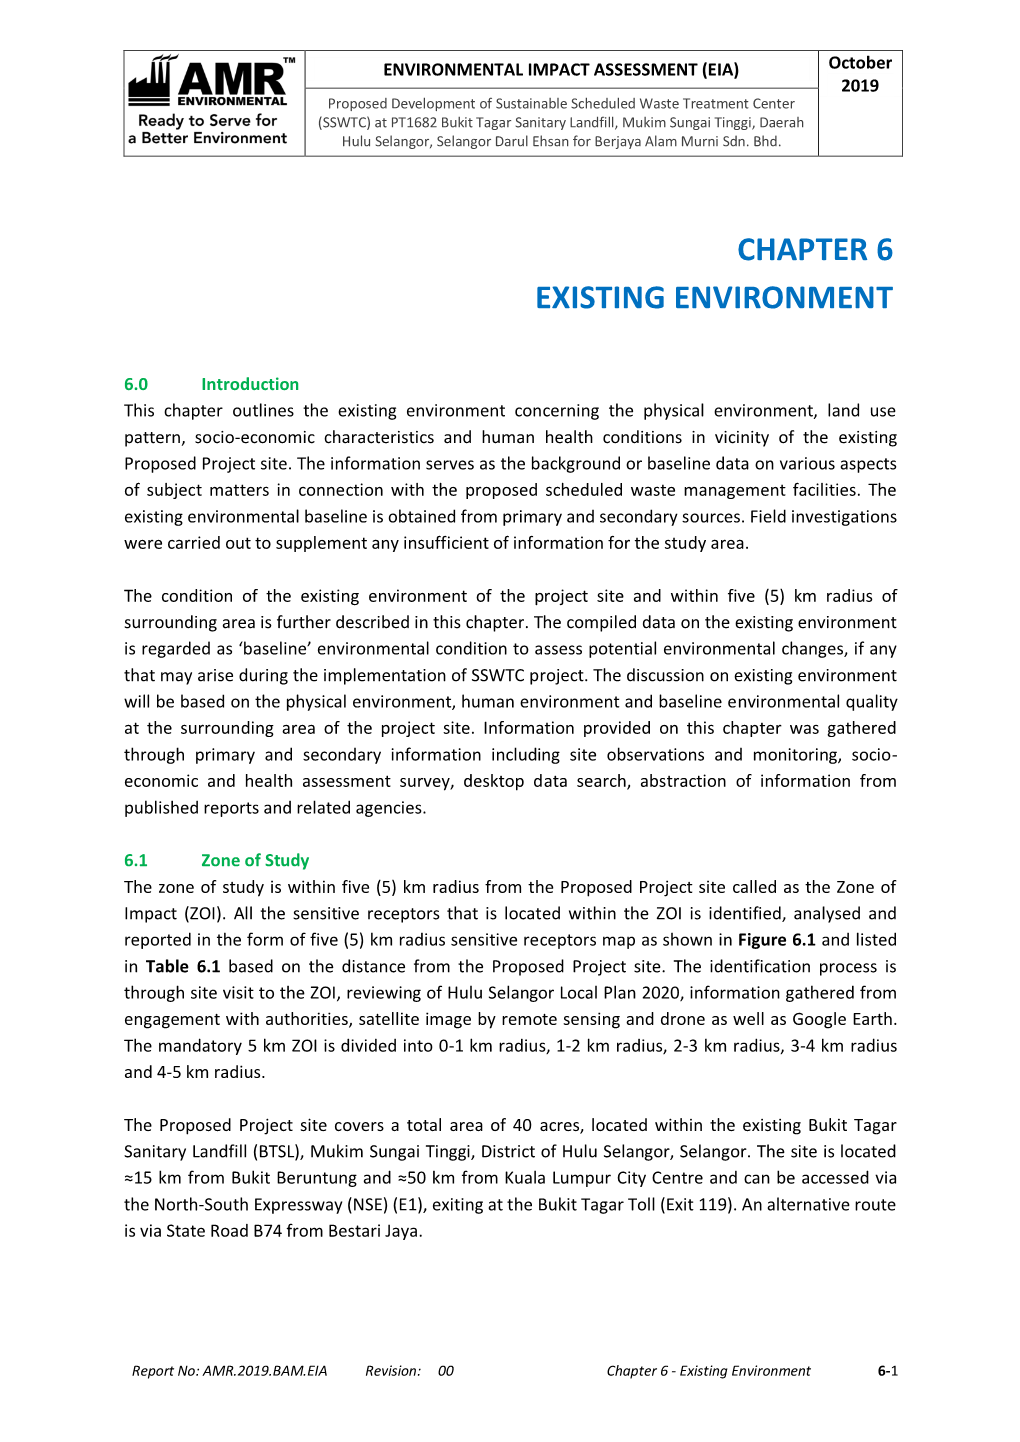 Chapter 6 Existing Environment